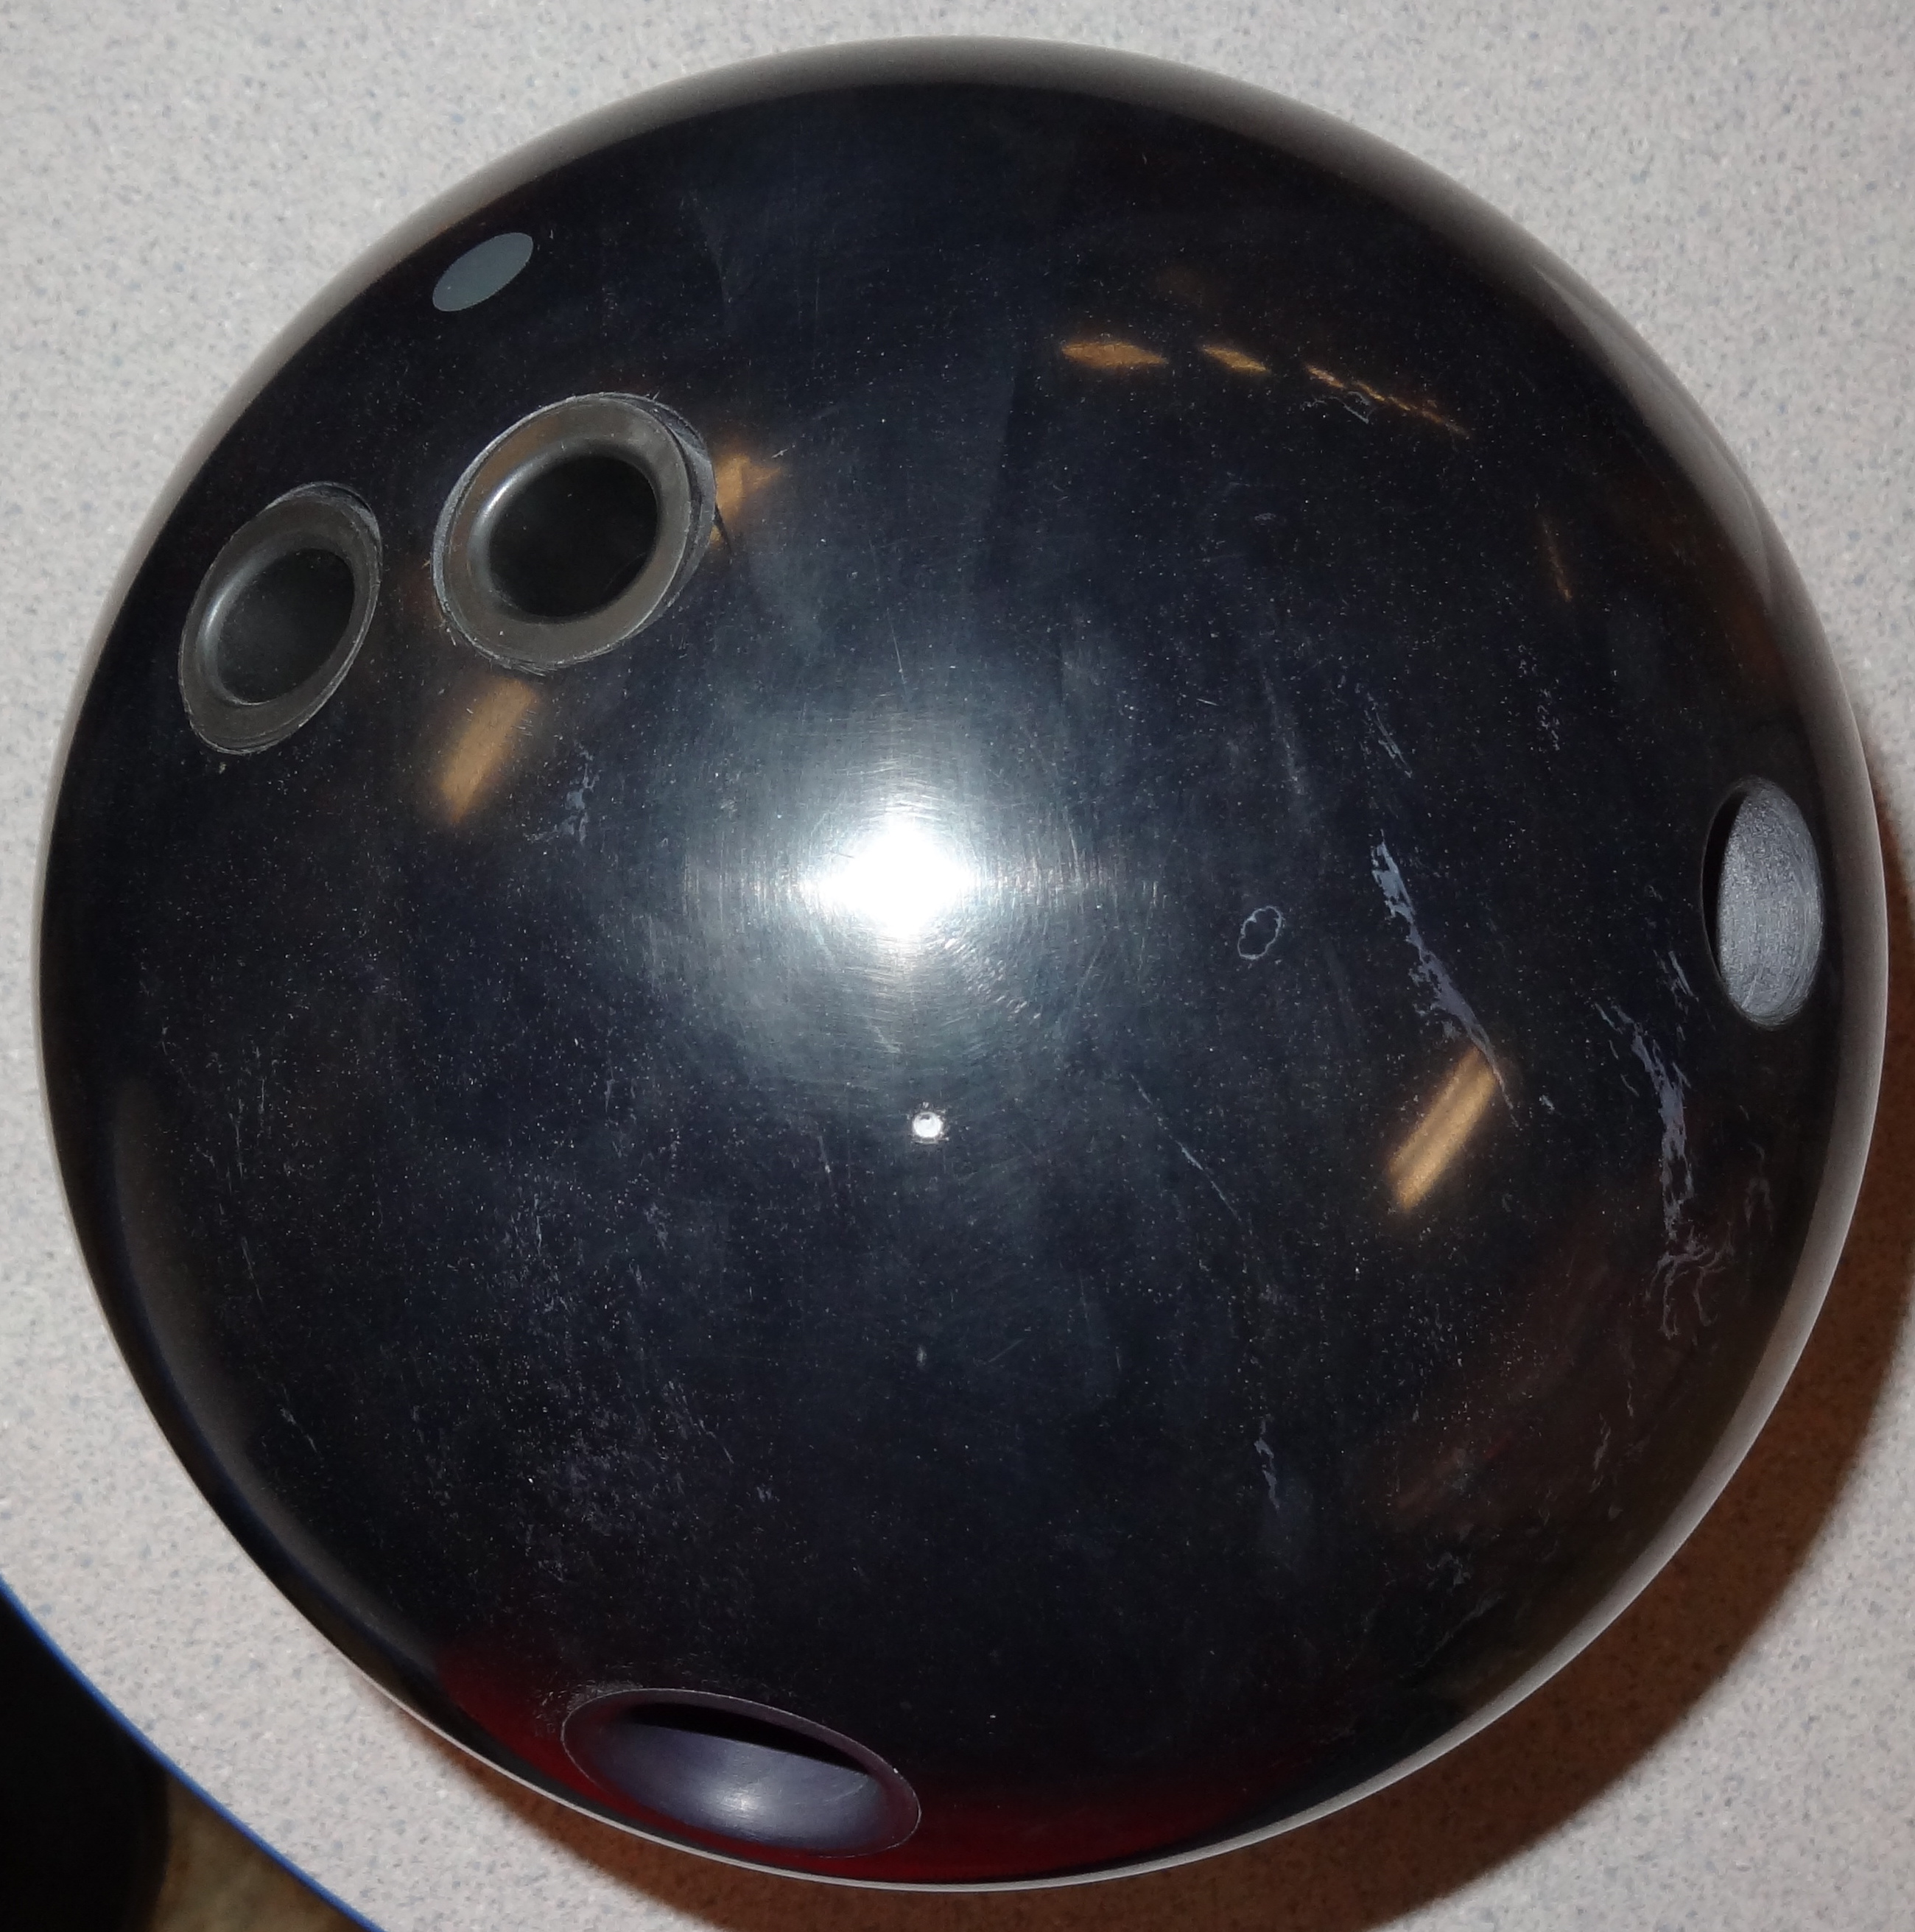 Motiv Covert Revolt Bowling Ball Review with Digitrax Analysis